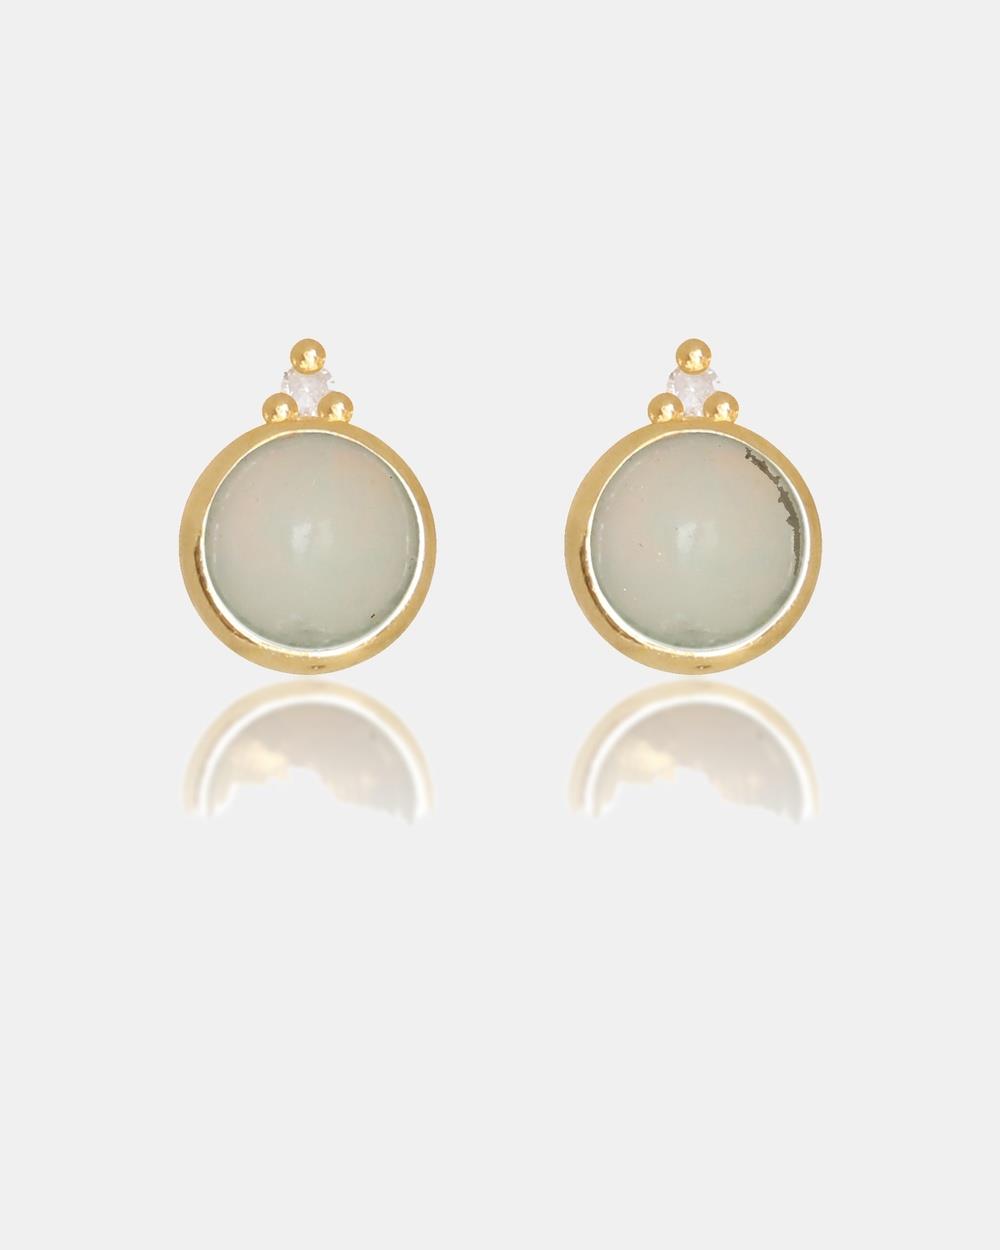 Georgini - Natural Opal And Two Natural Diamond October Gold Earrings - Jewellery (Gold) Natural Opal And Two Natural Diamond October Gold Earrings